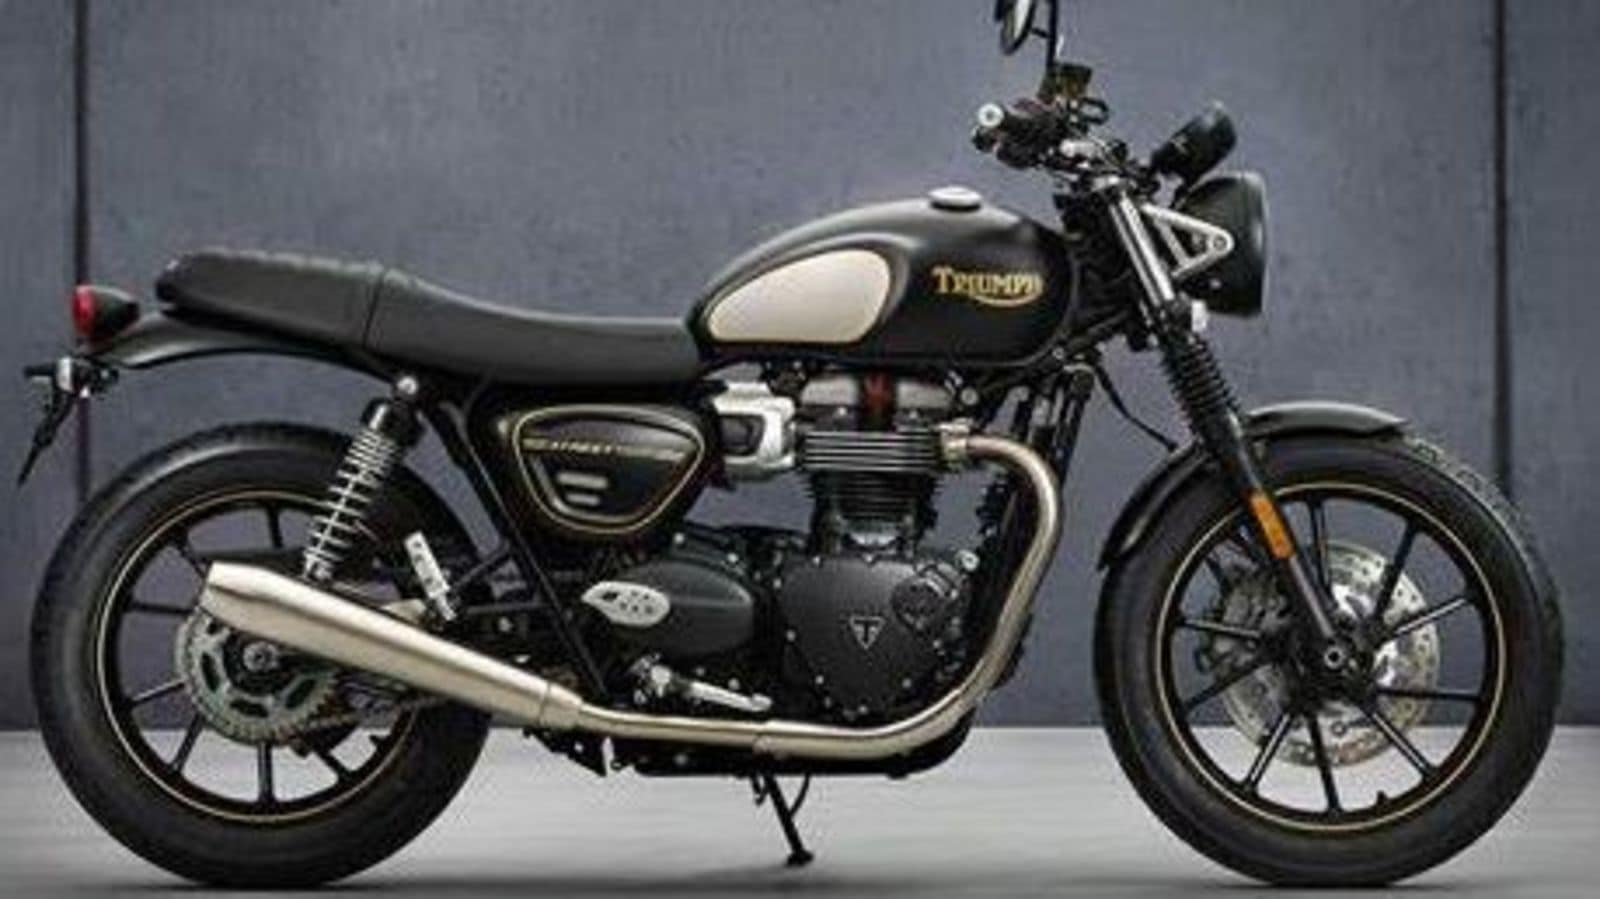 golpear Abrazadera seré fuerte Triumph Motorcycles launches new Gold Line edition models in India | HT Auto